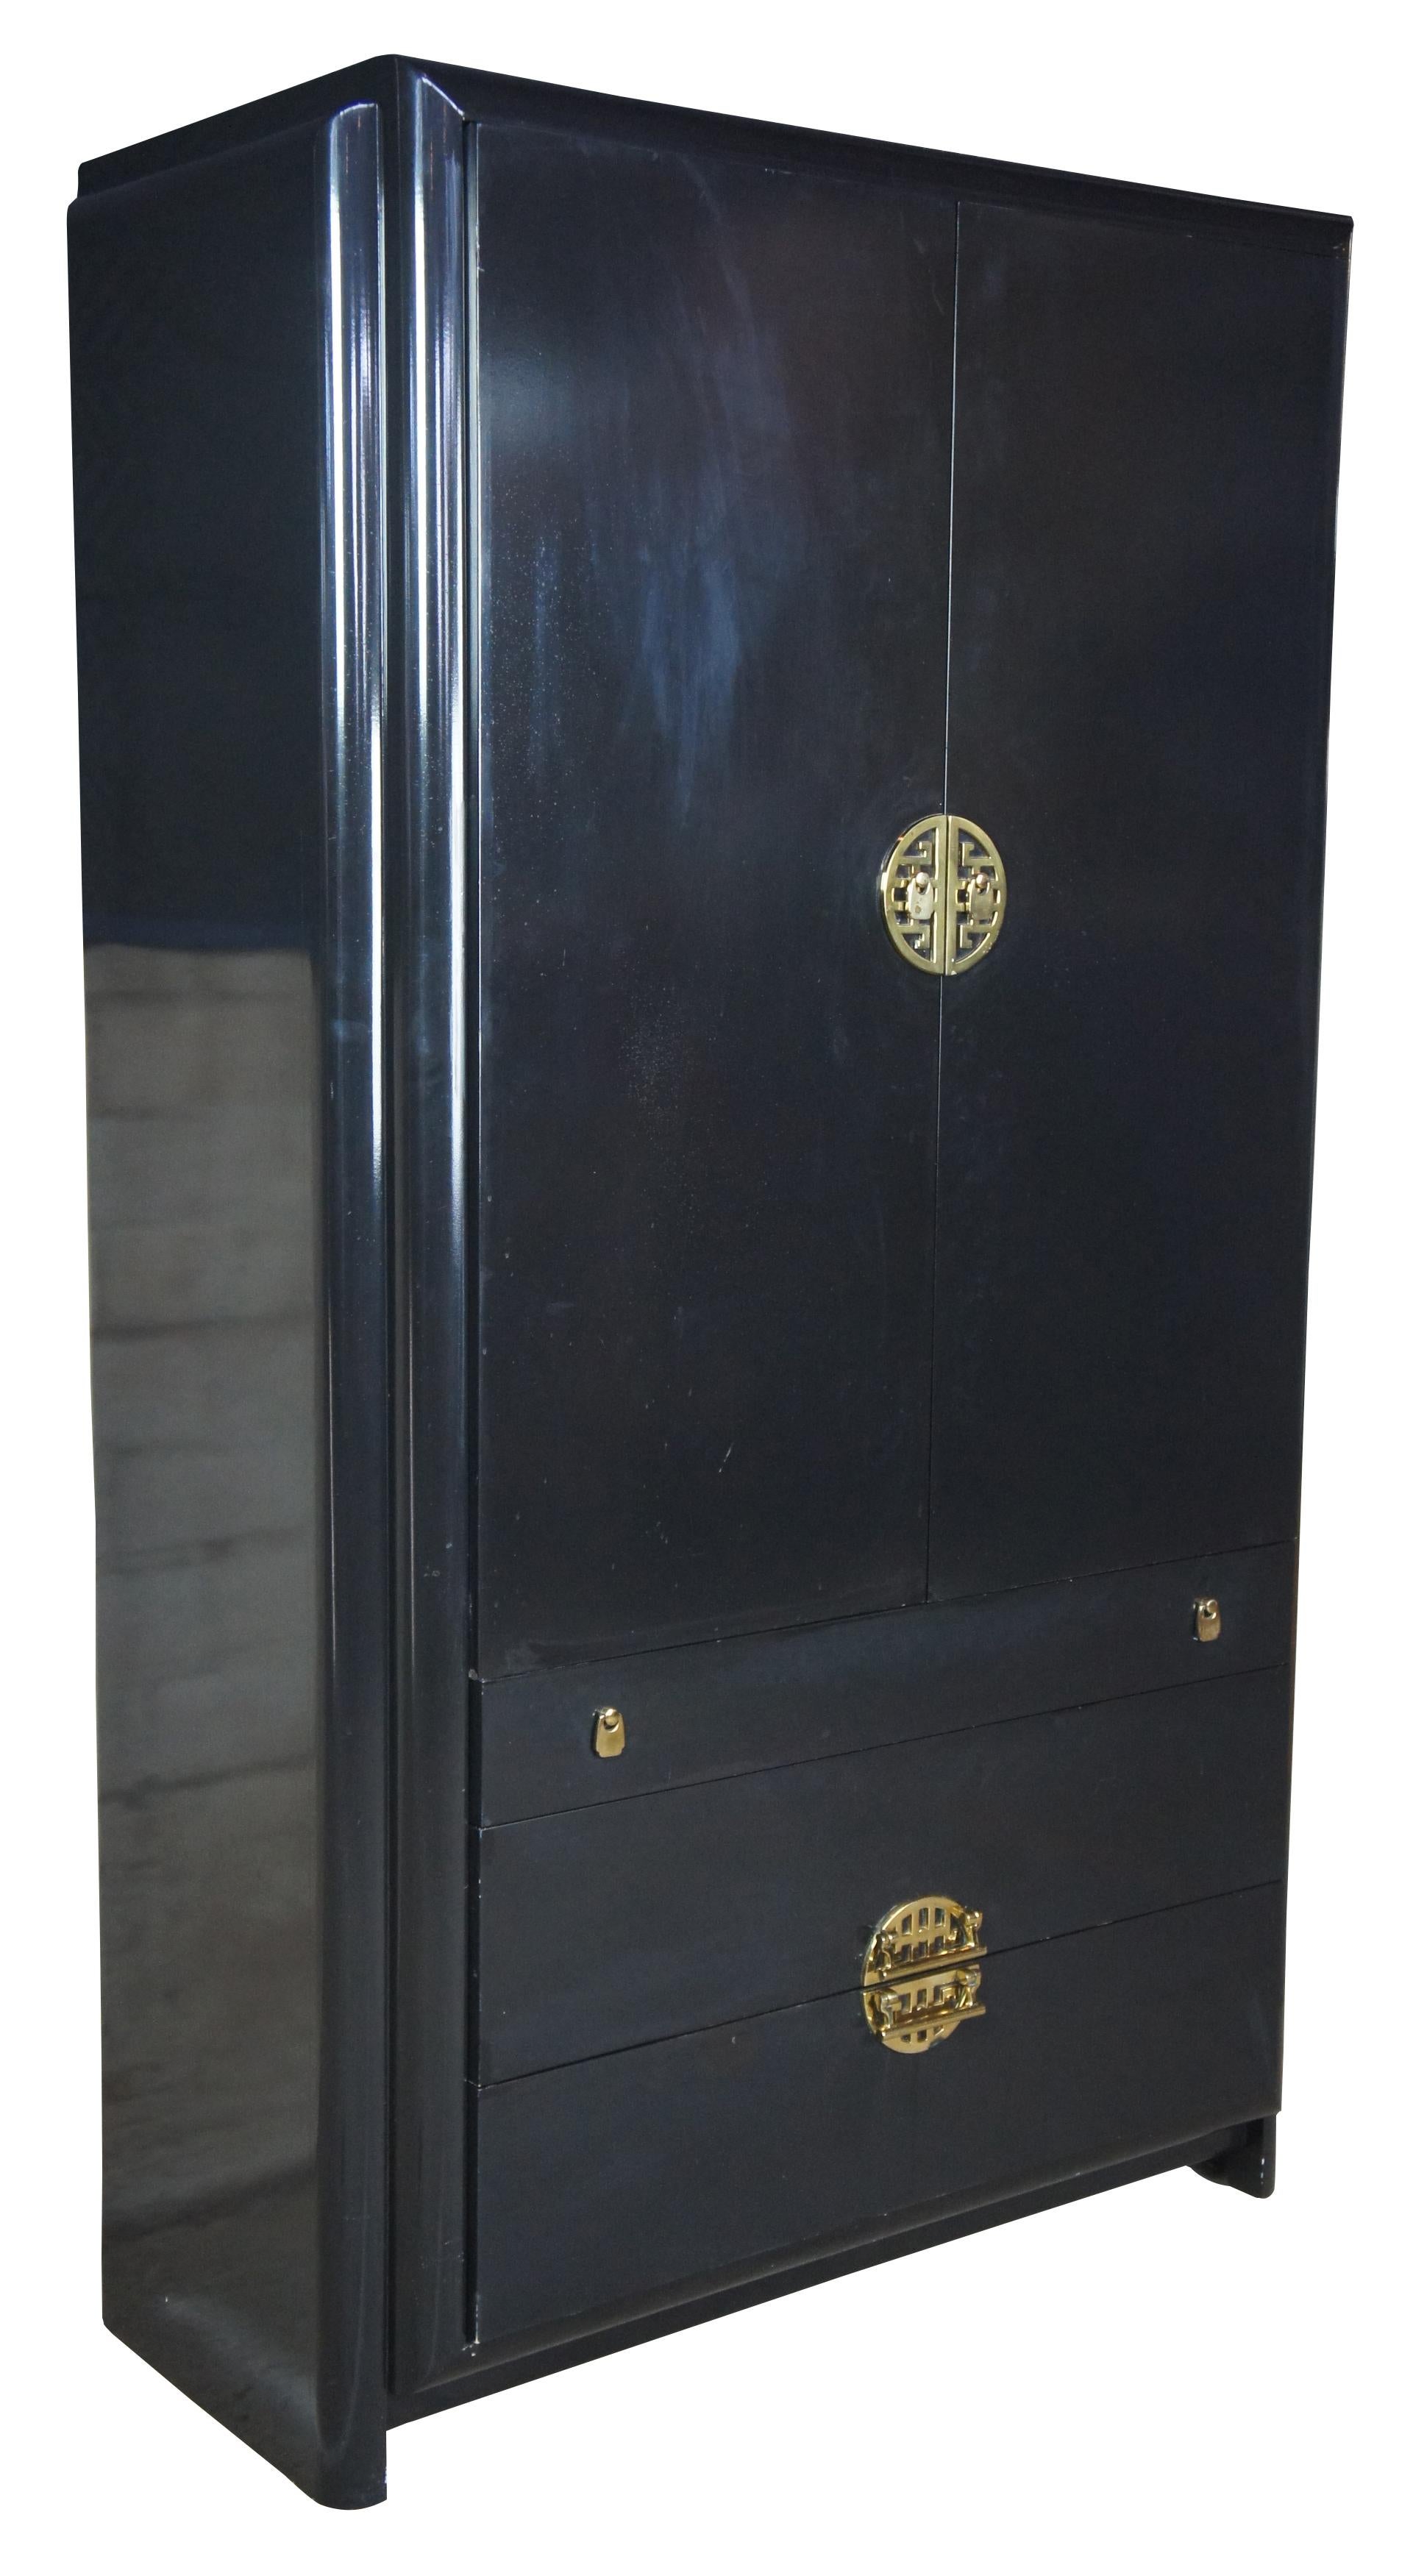 Romweber black lacquered midcentury Asian chinoiserie armoire modern wardrobe

Mid-20th century modern armoire by Romweber Furniture. Features an Asian inspired design with black lacquer finish and nickel polished hardware with oriental motif. The